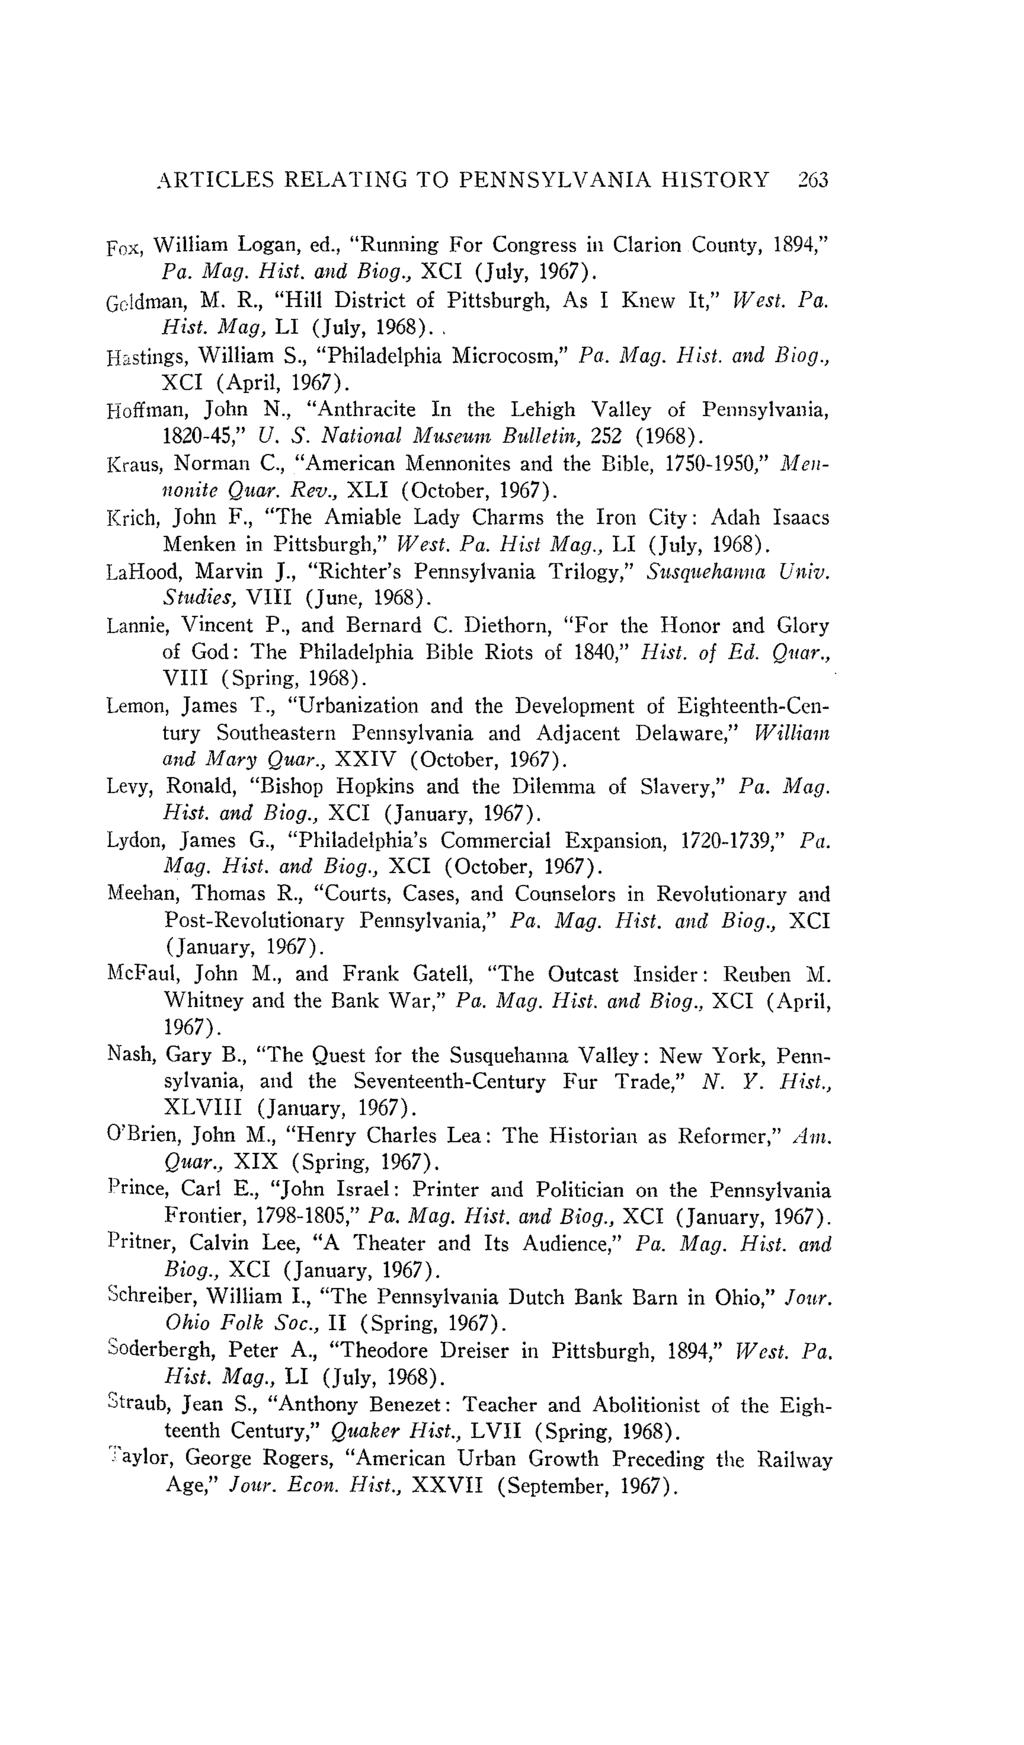 ARTICLES RELATING TO PENNSYLVANIA HISTORY 263 Fox, William Logan, ed., "Running For Congress in Clarion County, 1894," Pa. Mag. Hist. and Biog., XCI (July, 1967). Goldman, M. R., "Hill District of Pittsburgh, As I Knew It," West.